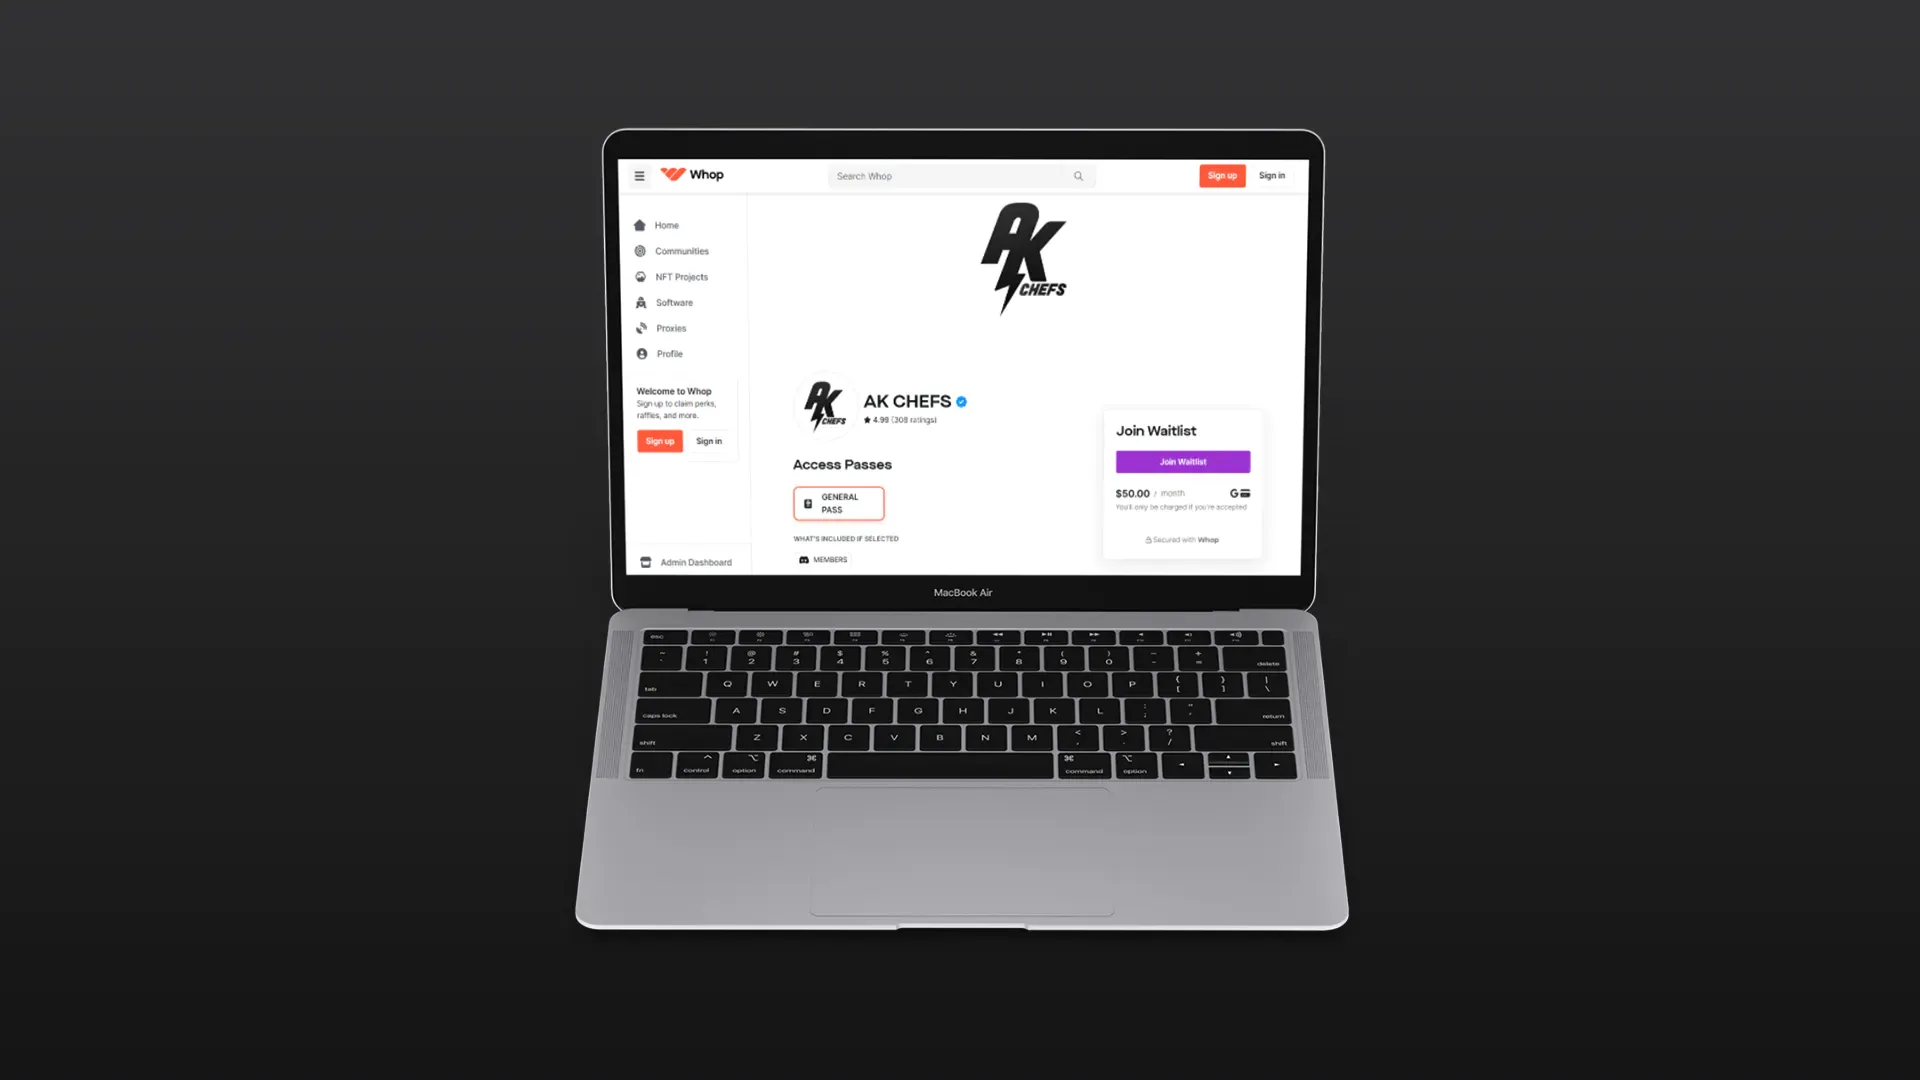 AKCHEFS reselling discord server